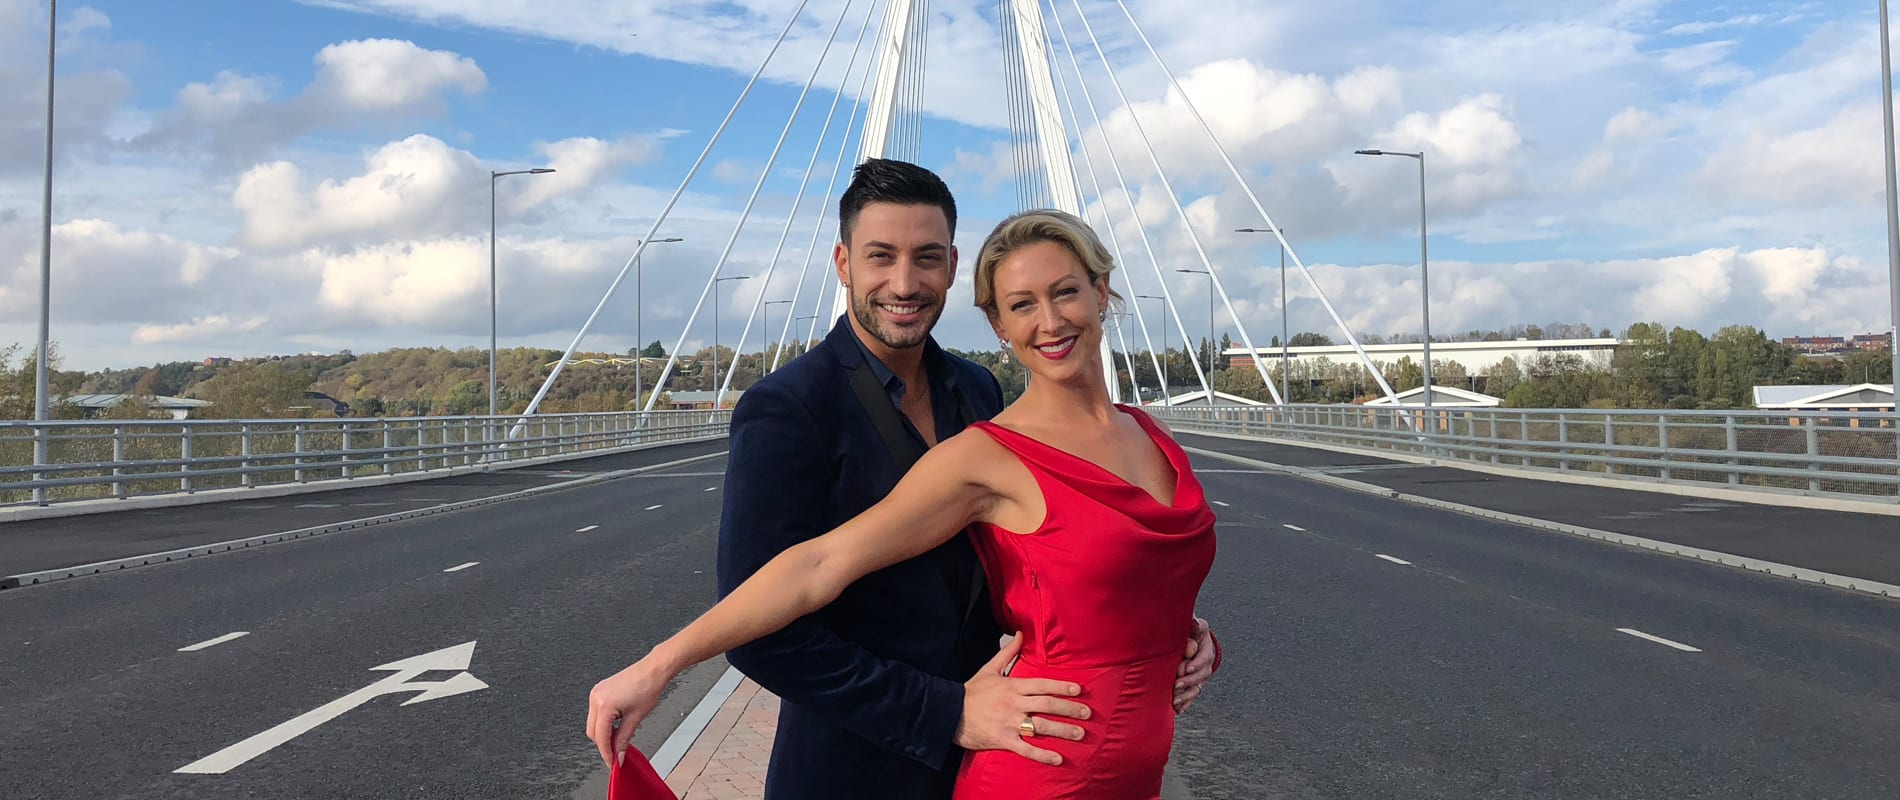 Photo of Strictly's Giovanni Pernice and Faye Tozer on the Northern Spire Bridge